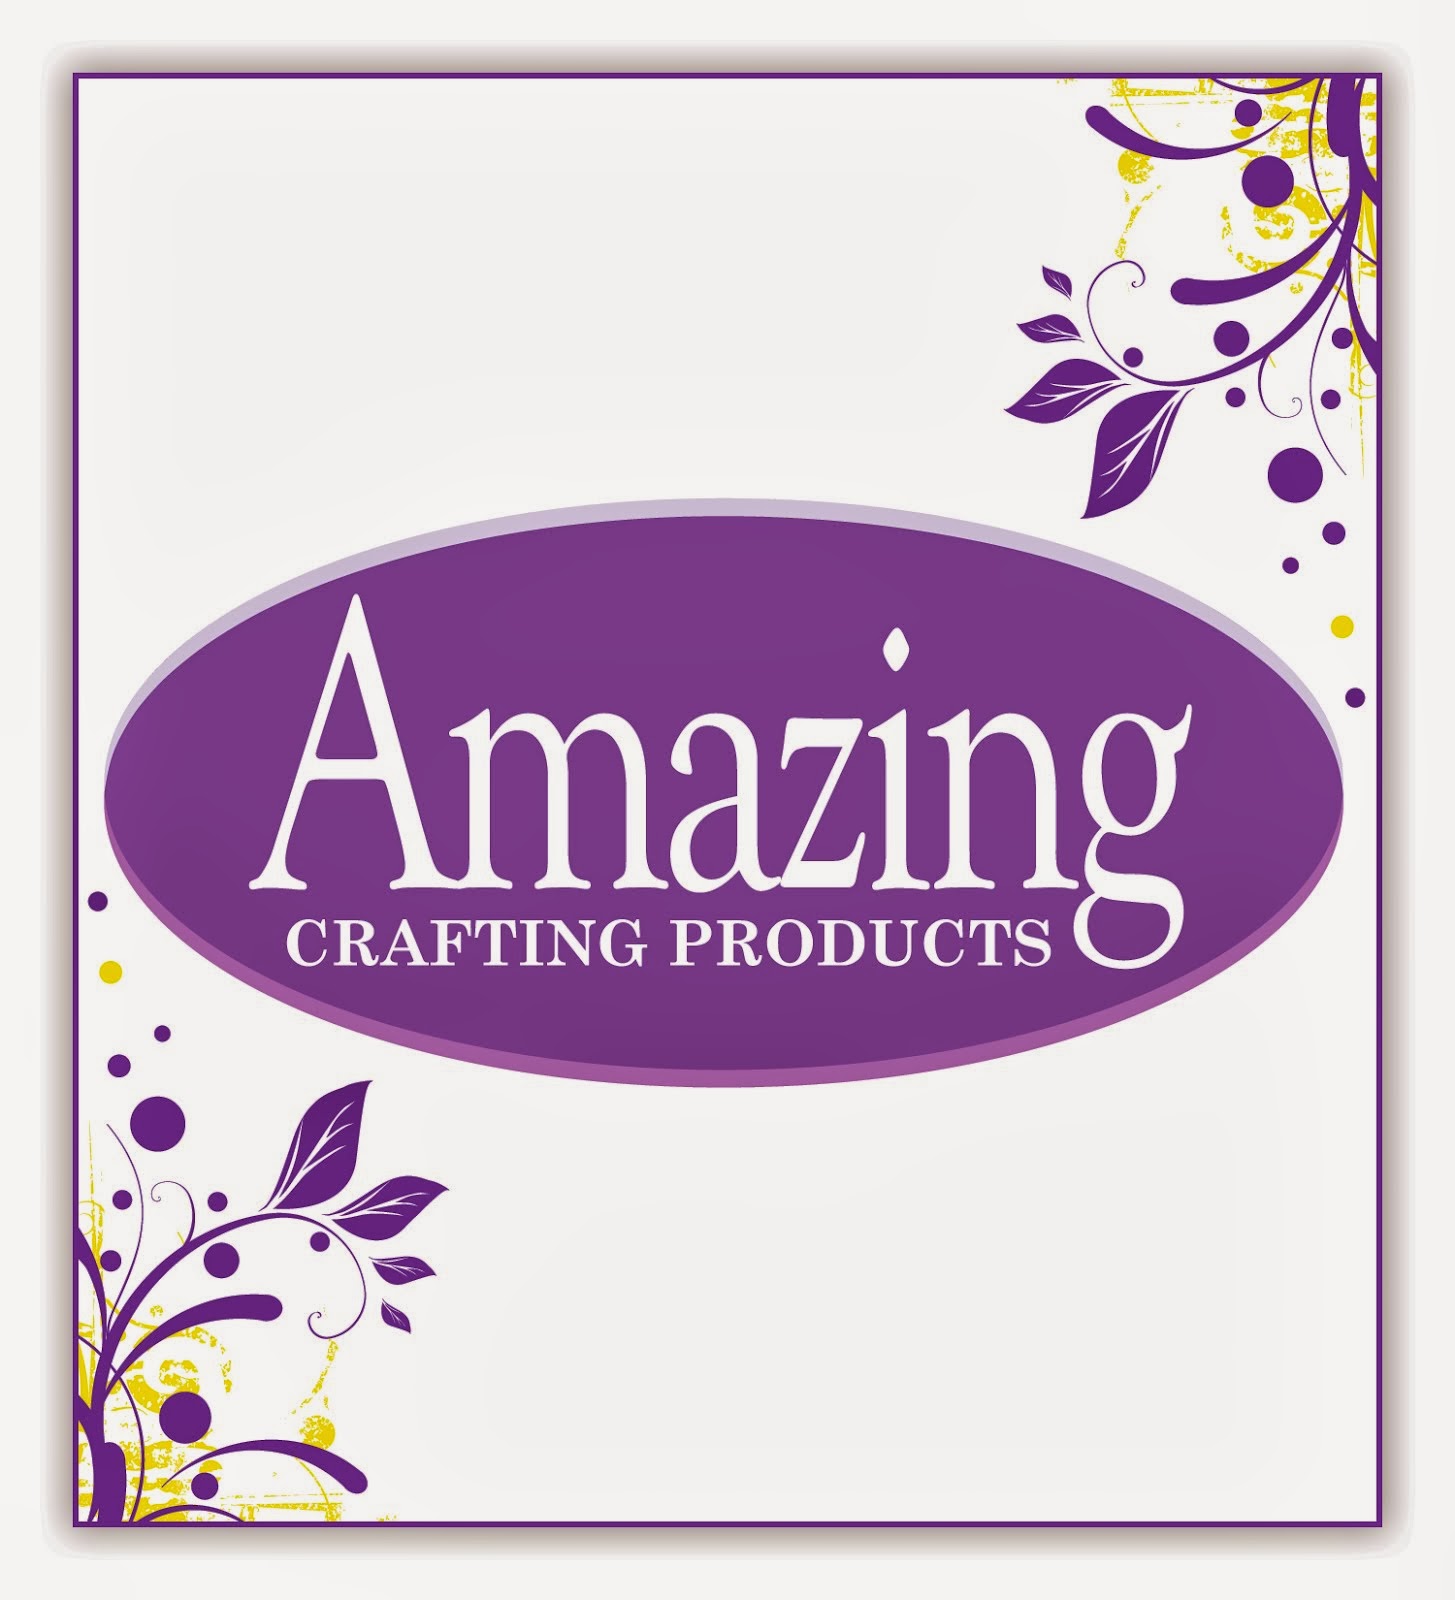 Welcoming Amazing Crafting Products to our world of creating art